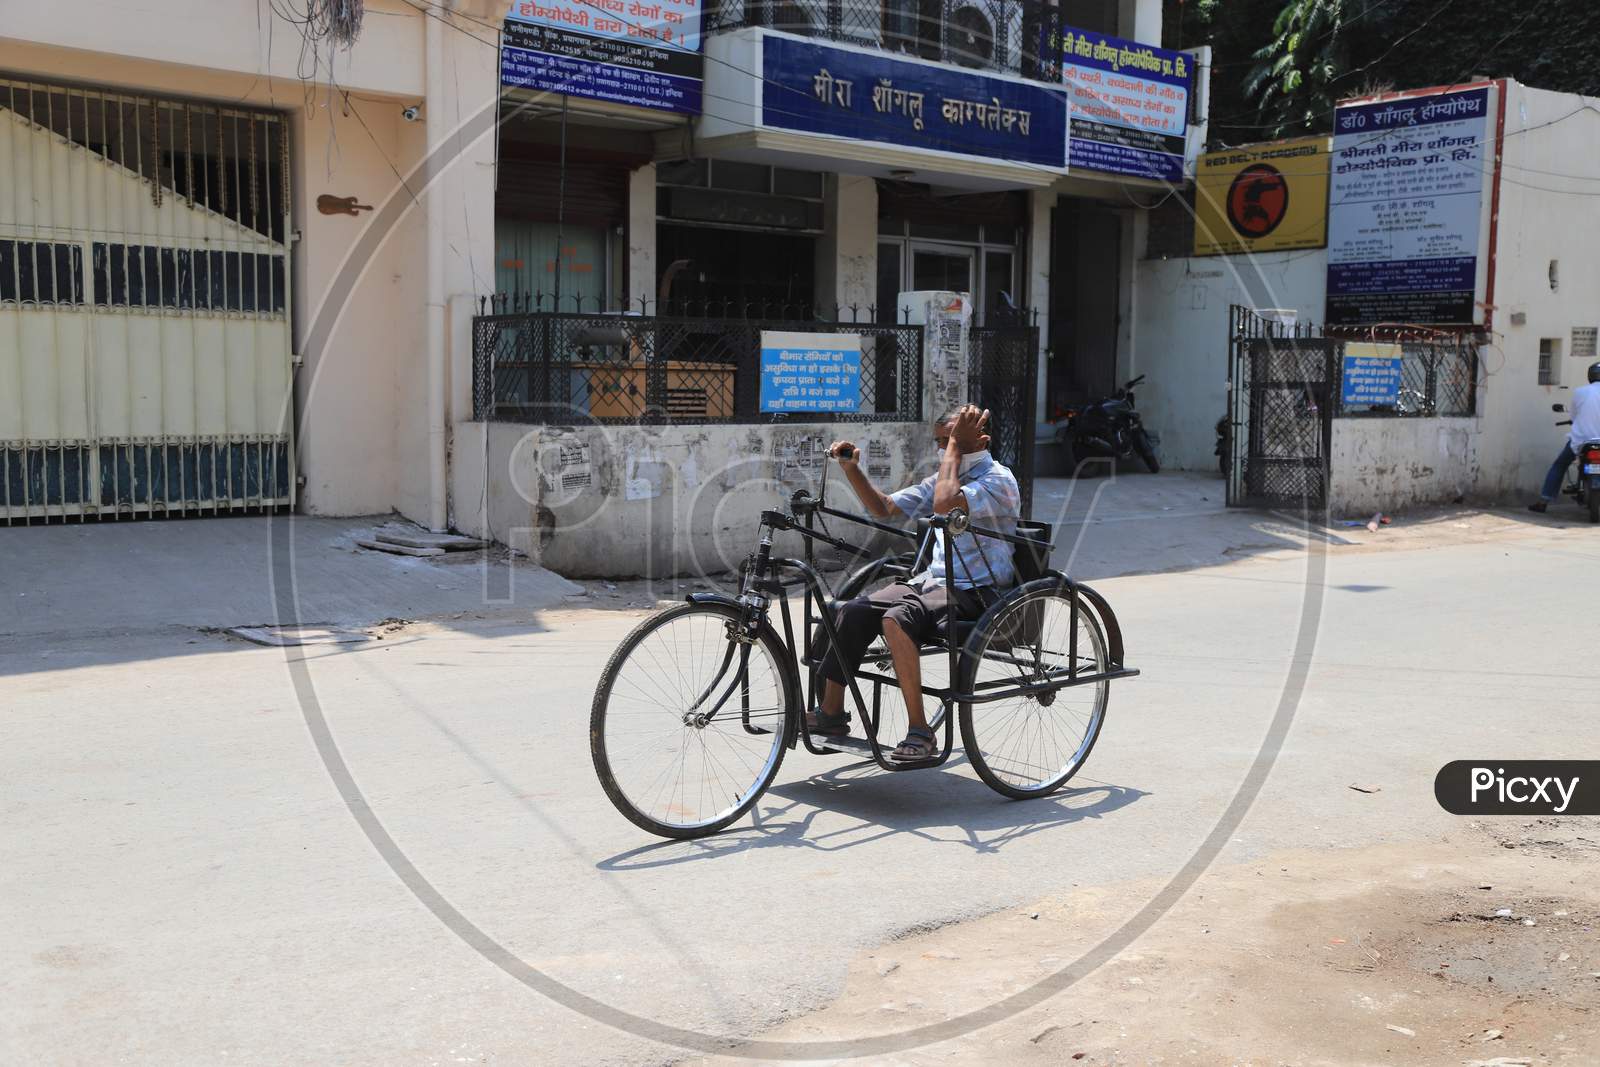 A Physically Challenged Man Rides a Tricycle On Empty Streets During Nationwide Lockdown Amidst Coronavirus Or COVID-19 Outbreak in Prayagraj